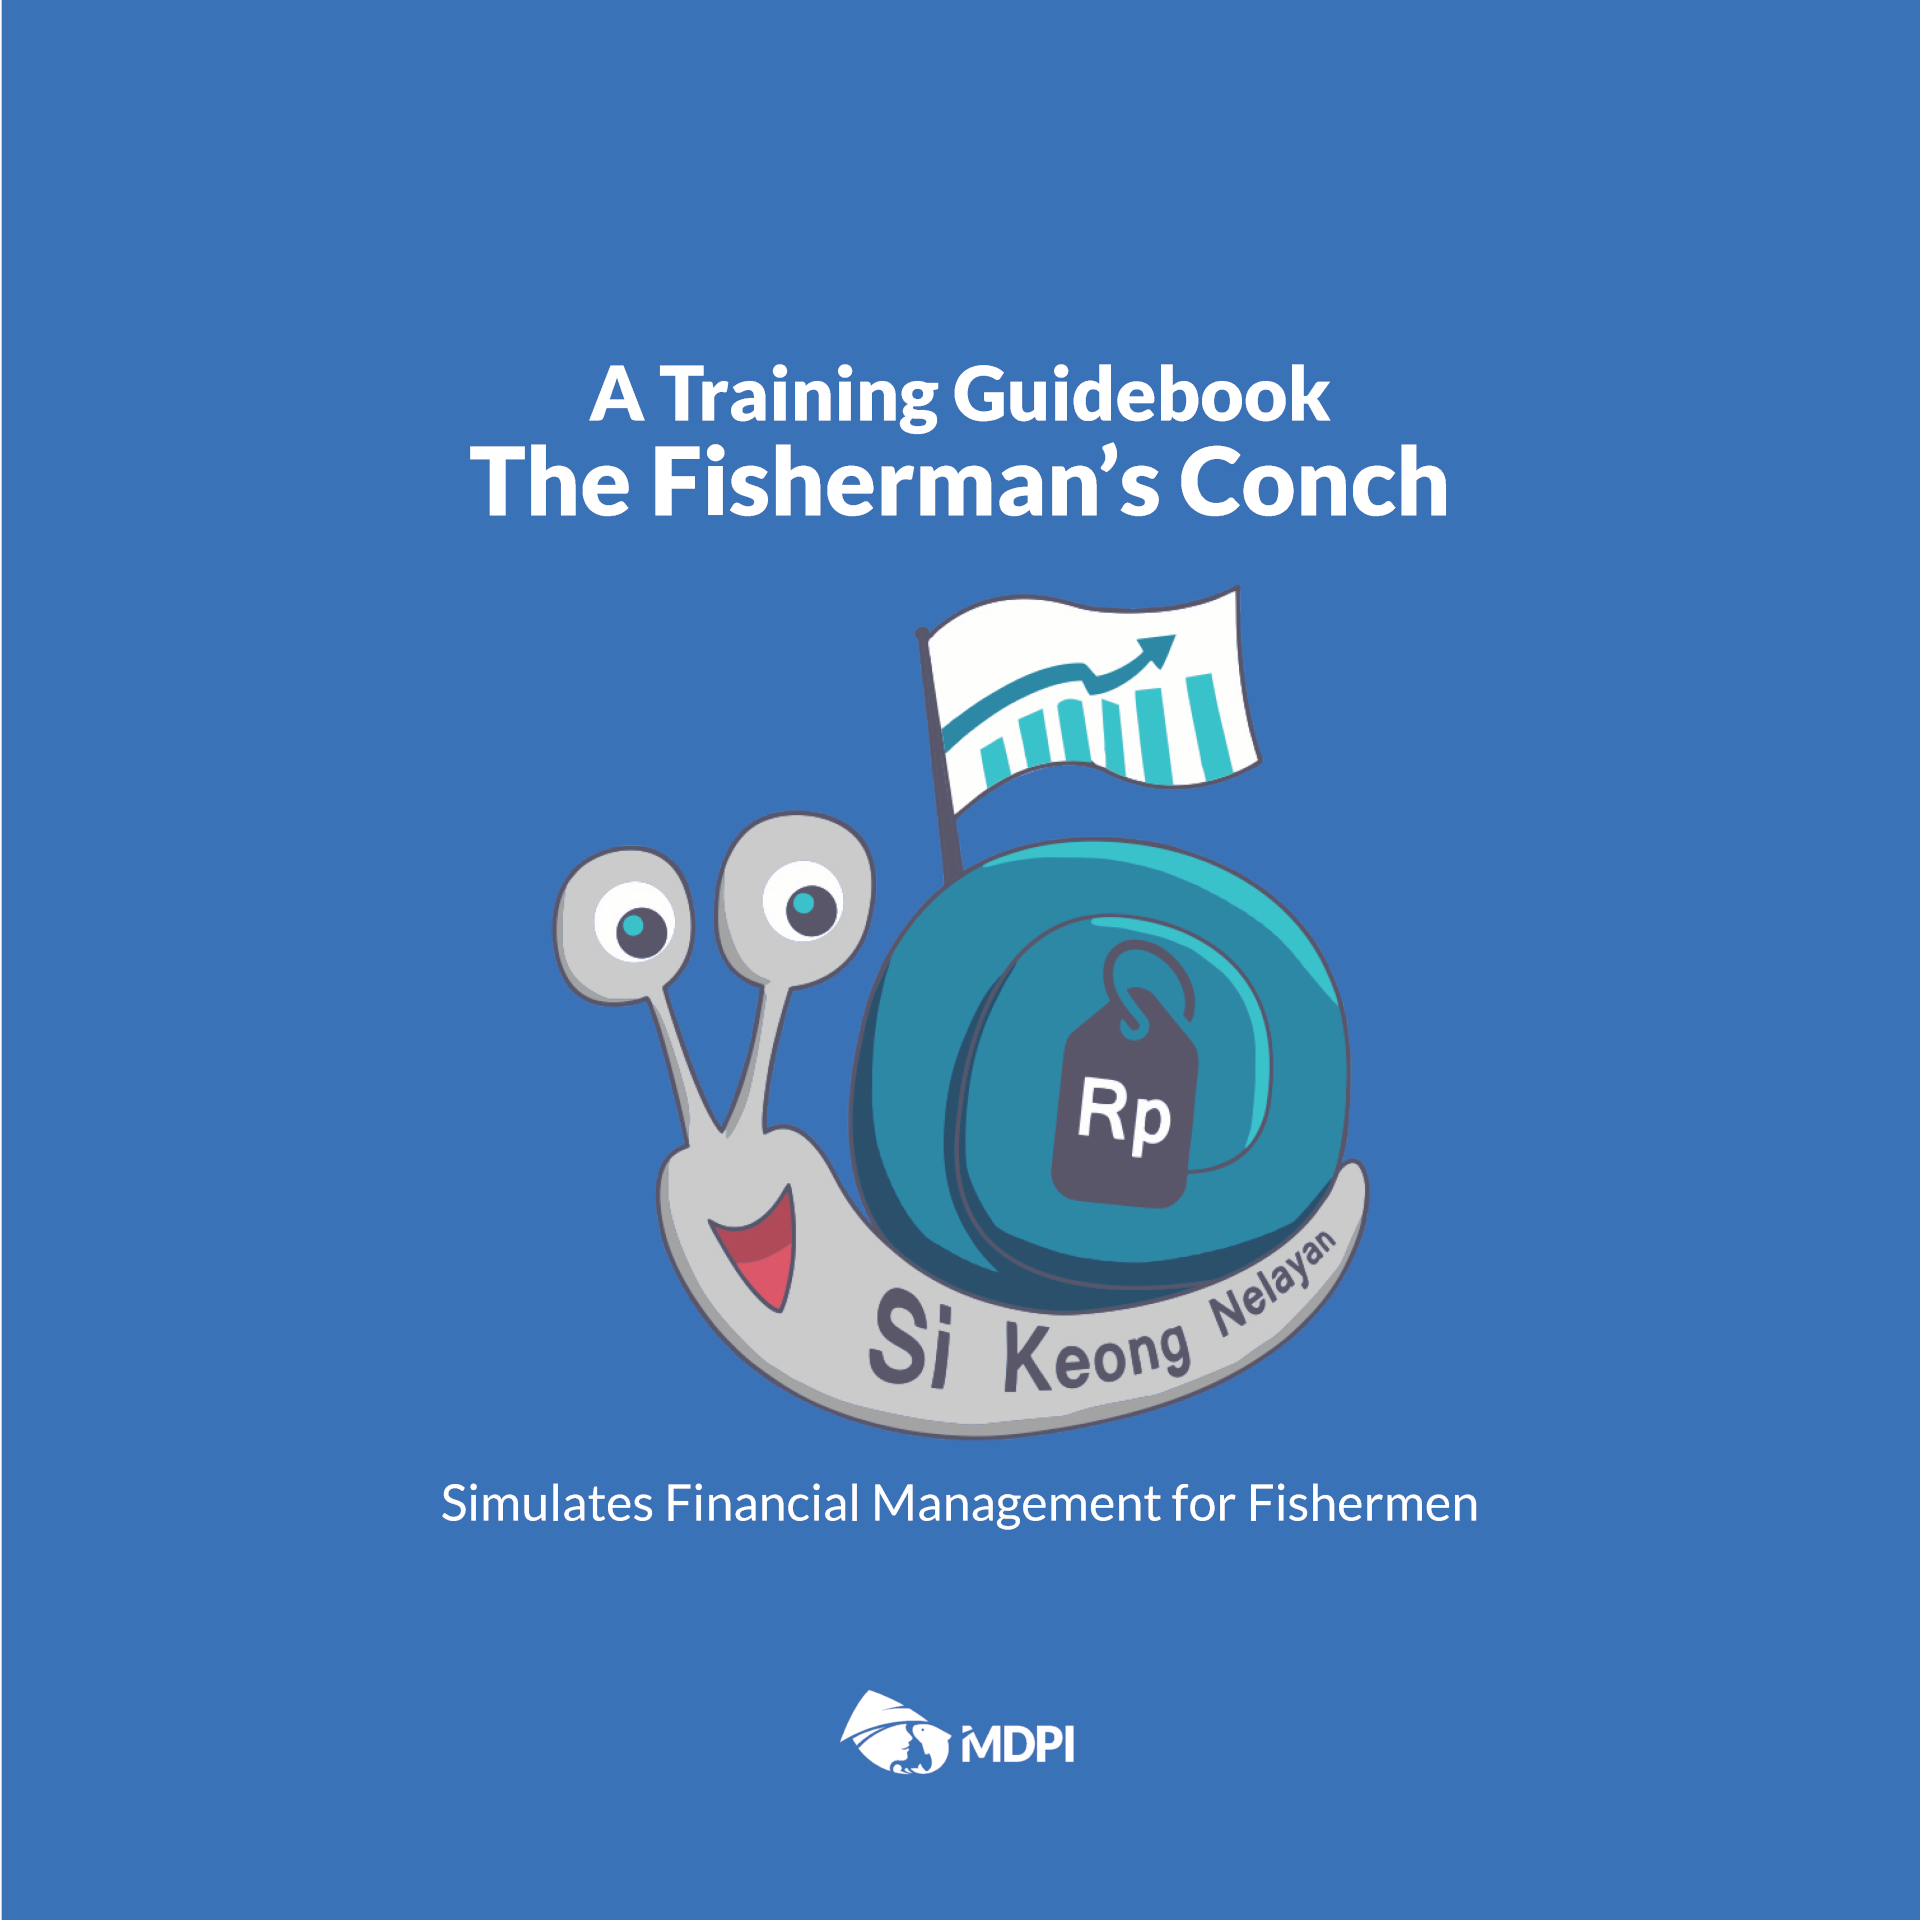 A Training Guidebook The Fisherman's Conch